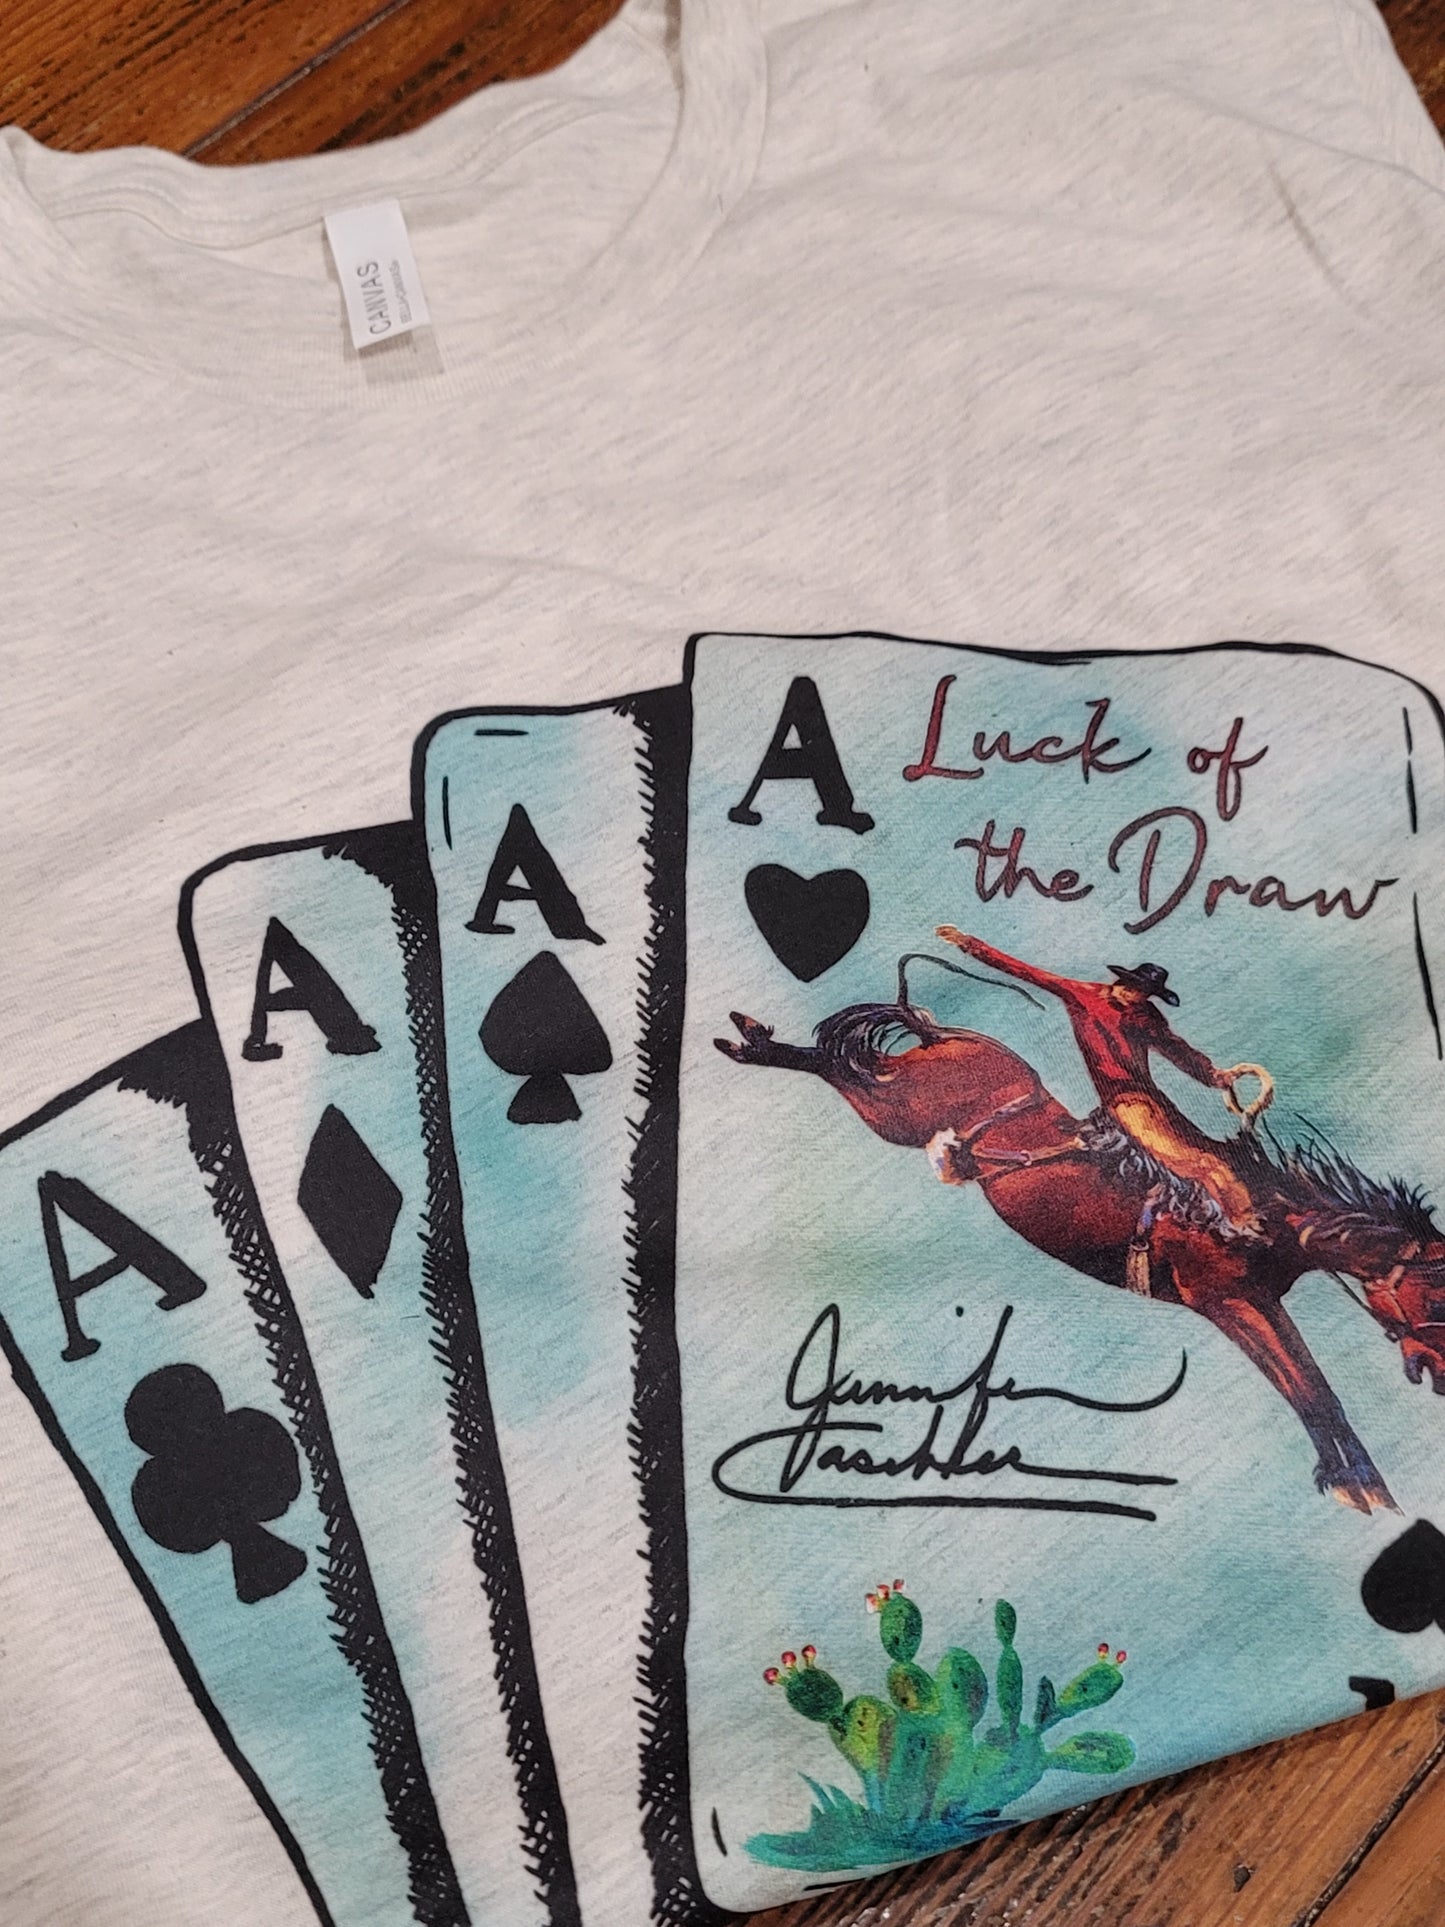 The Luck of the Draw T-shirt, Jennifer Casebeer Art